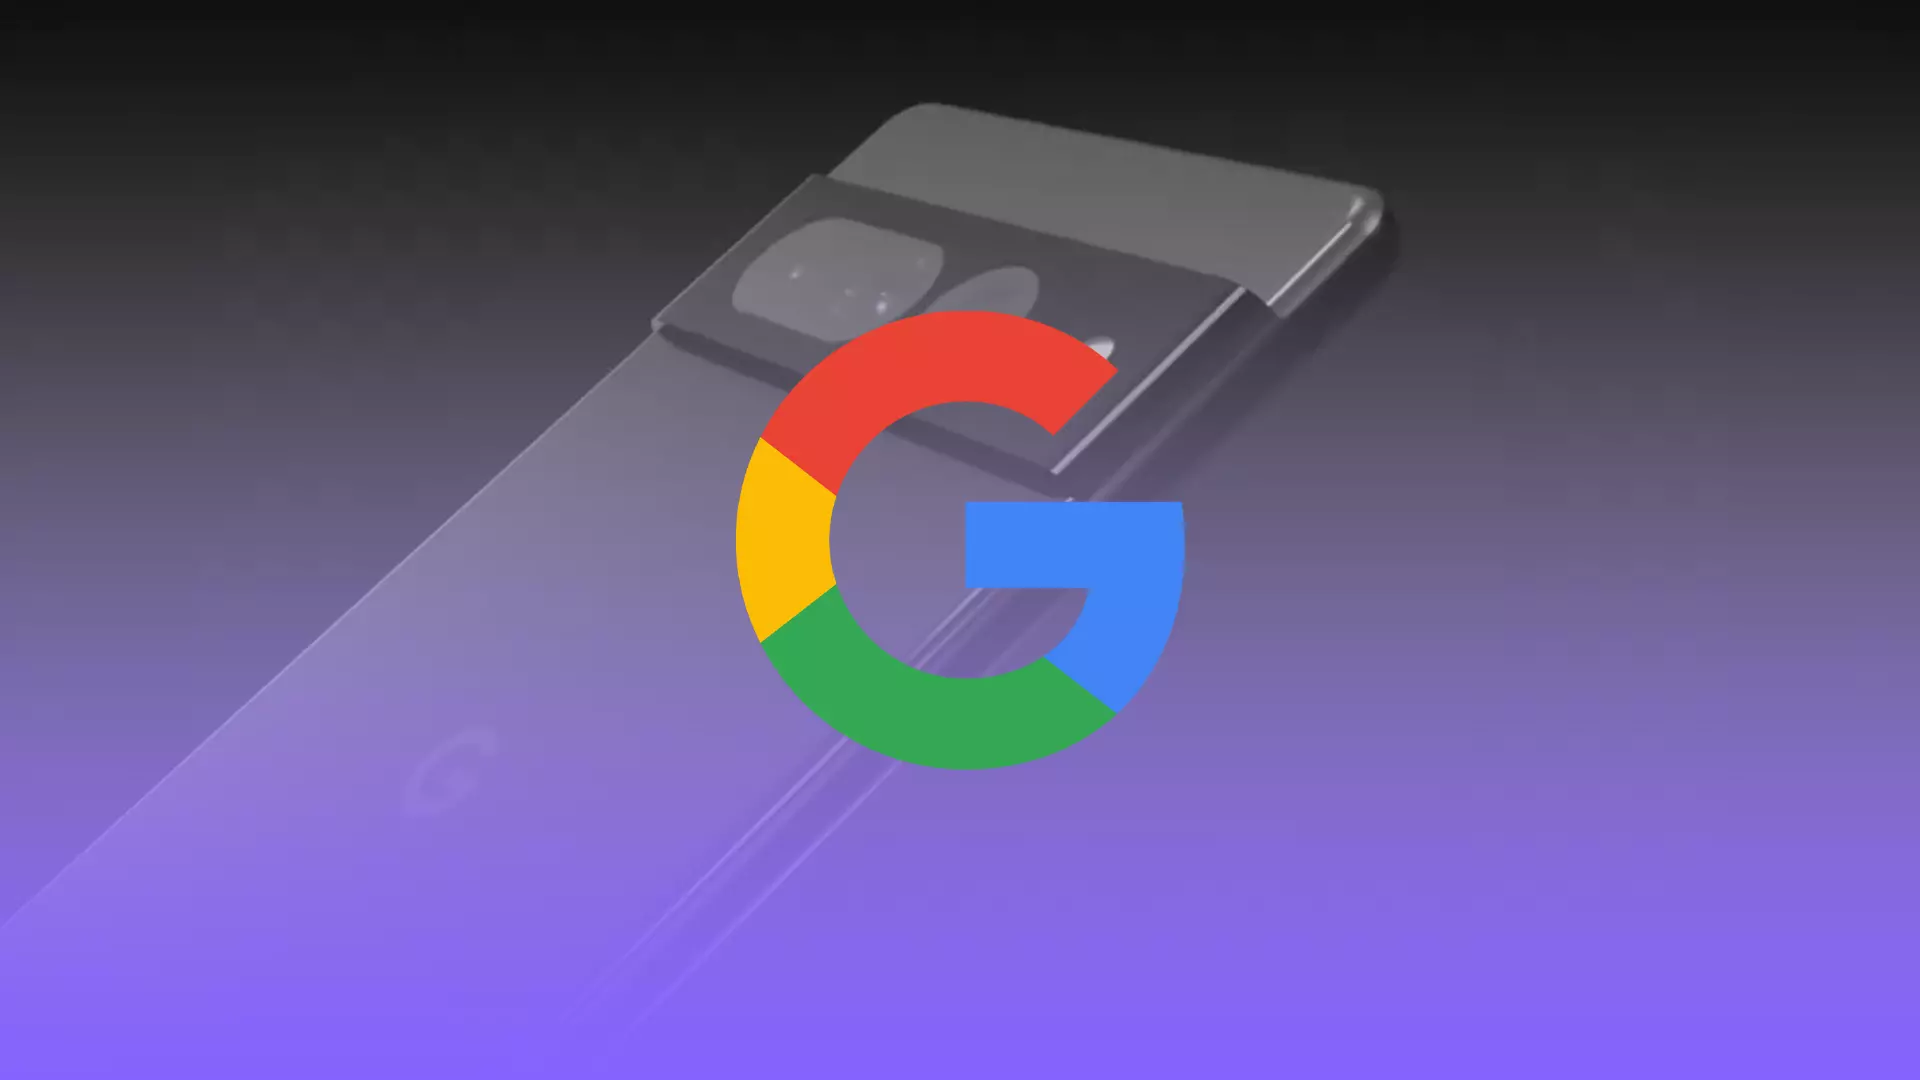 Google Pixel 7 Pro was shown in an out-of-the-box video ahead of the presentation